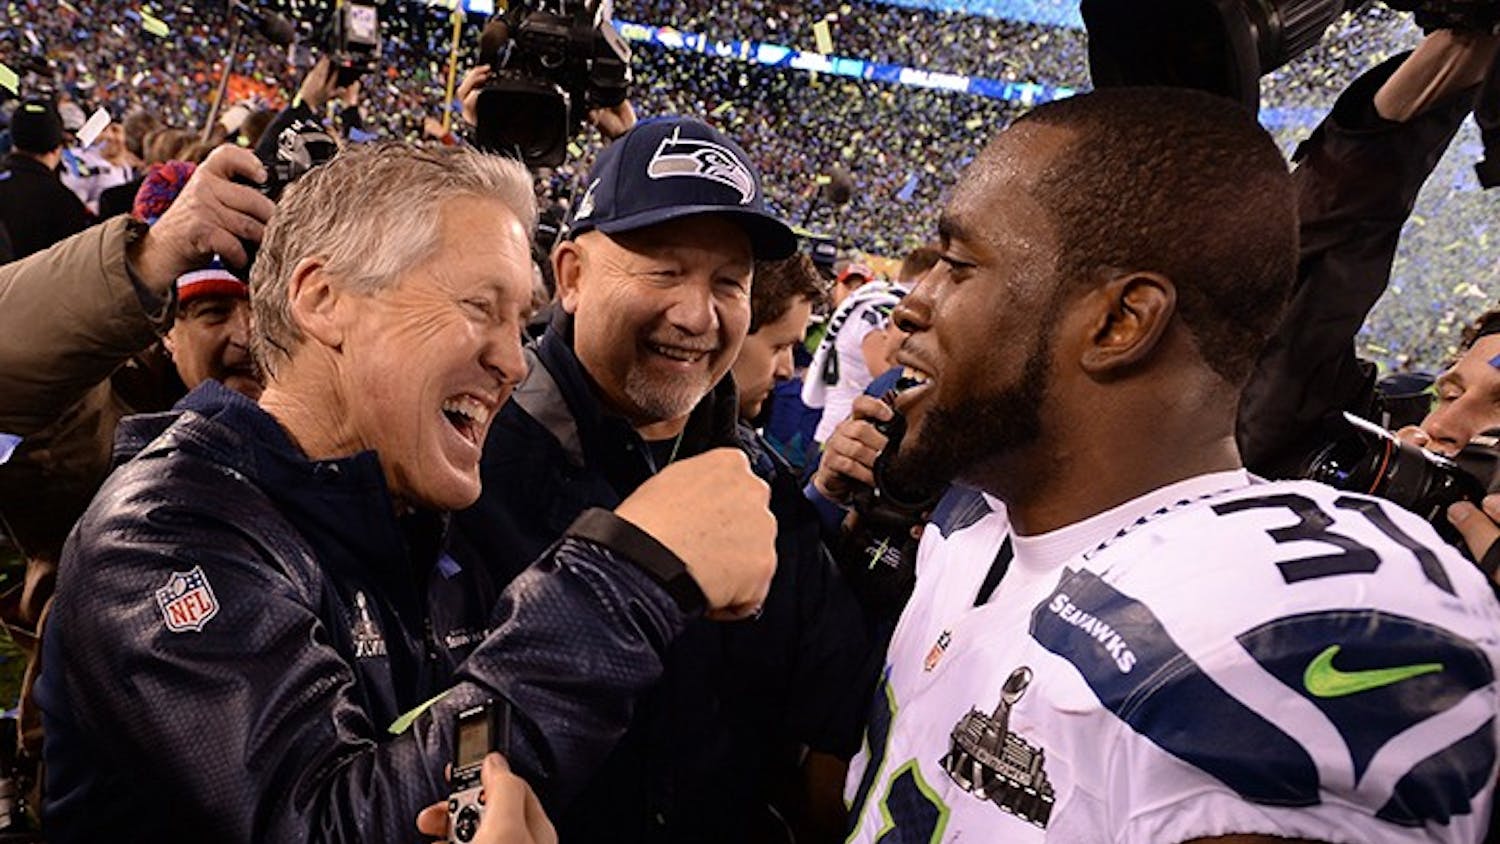 Head coach Pete Carroll of the Seahawks celebrates with Kam Chancellor (31) after Seattle wins Super Bowl XLVIII at MetLife Stadium in East Rutherford, N.J., on Sunday, Feb. 2, 2014. The Seattle Seahawks defeated the Denver Broncos, 43-8. (Lionel Hahn/Abaca Press/MCT)